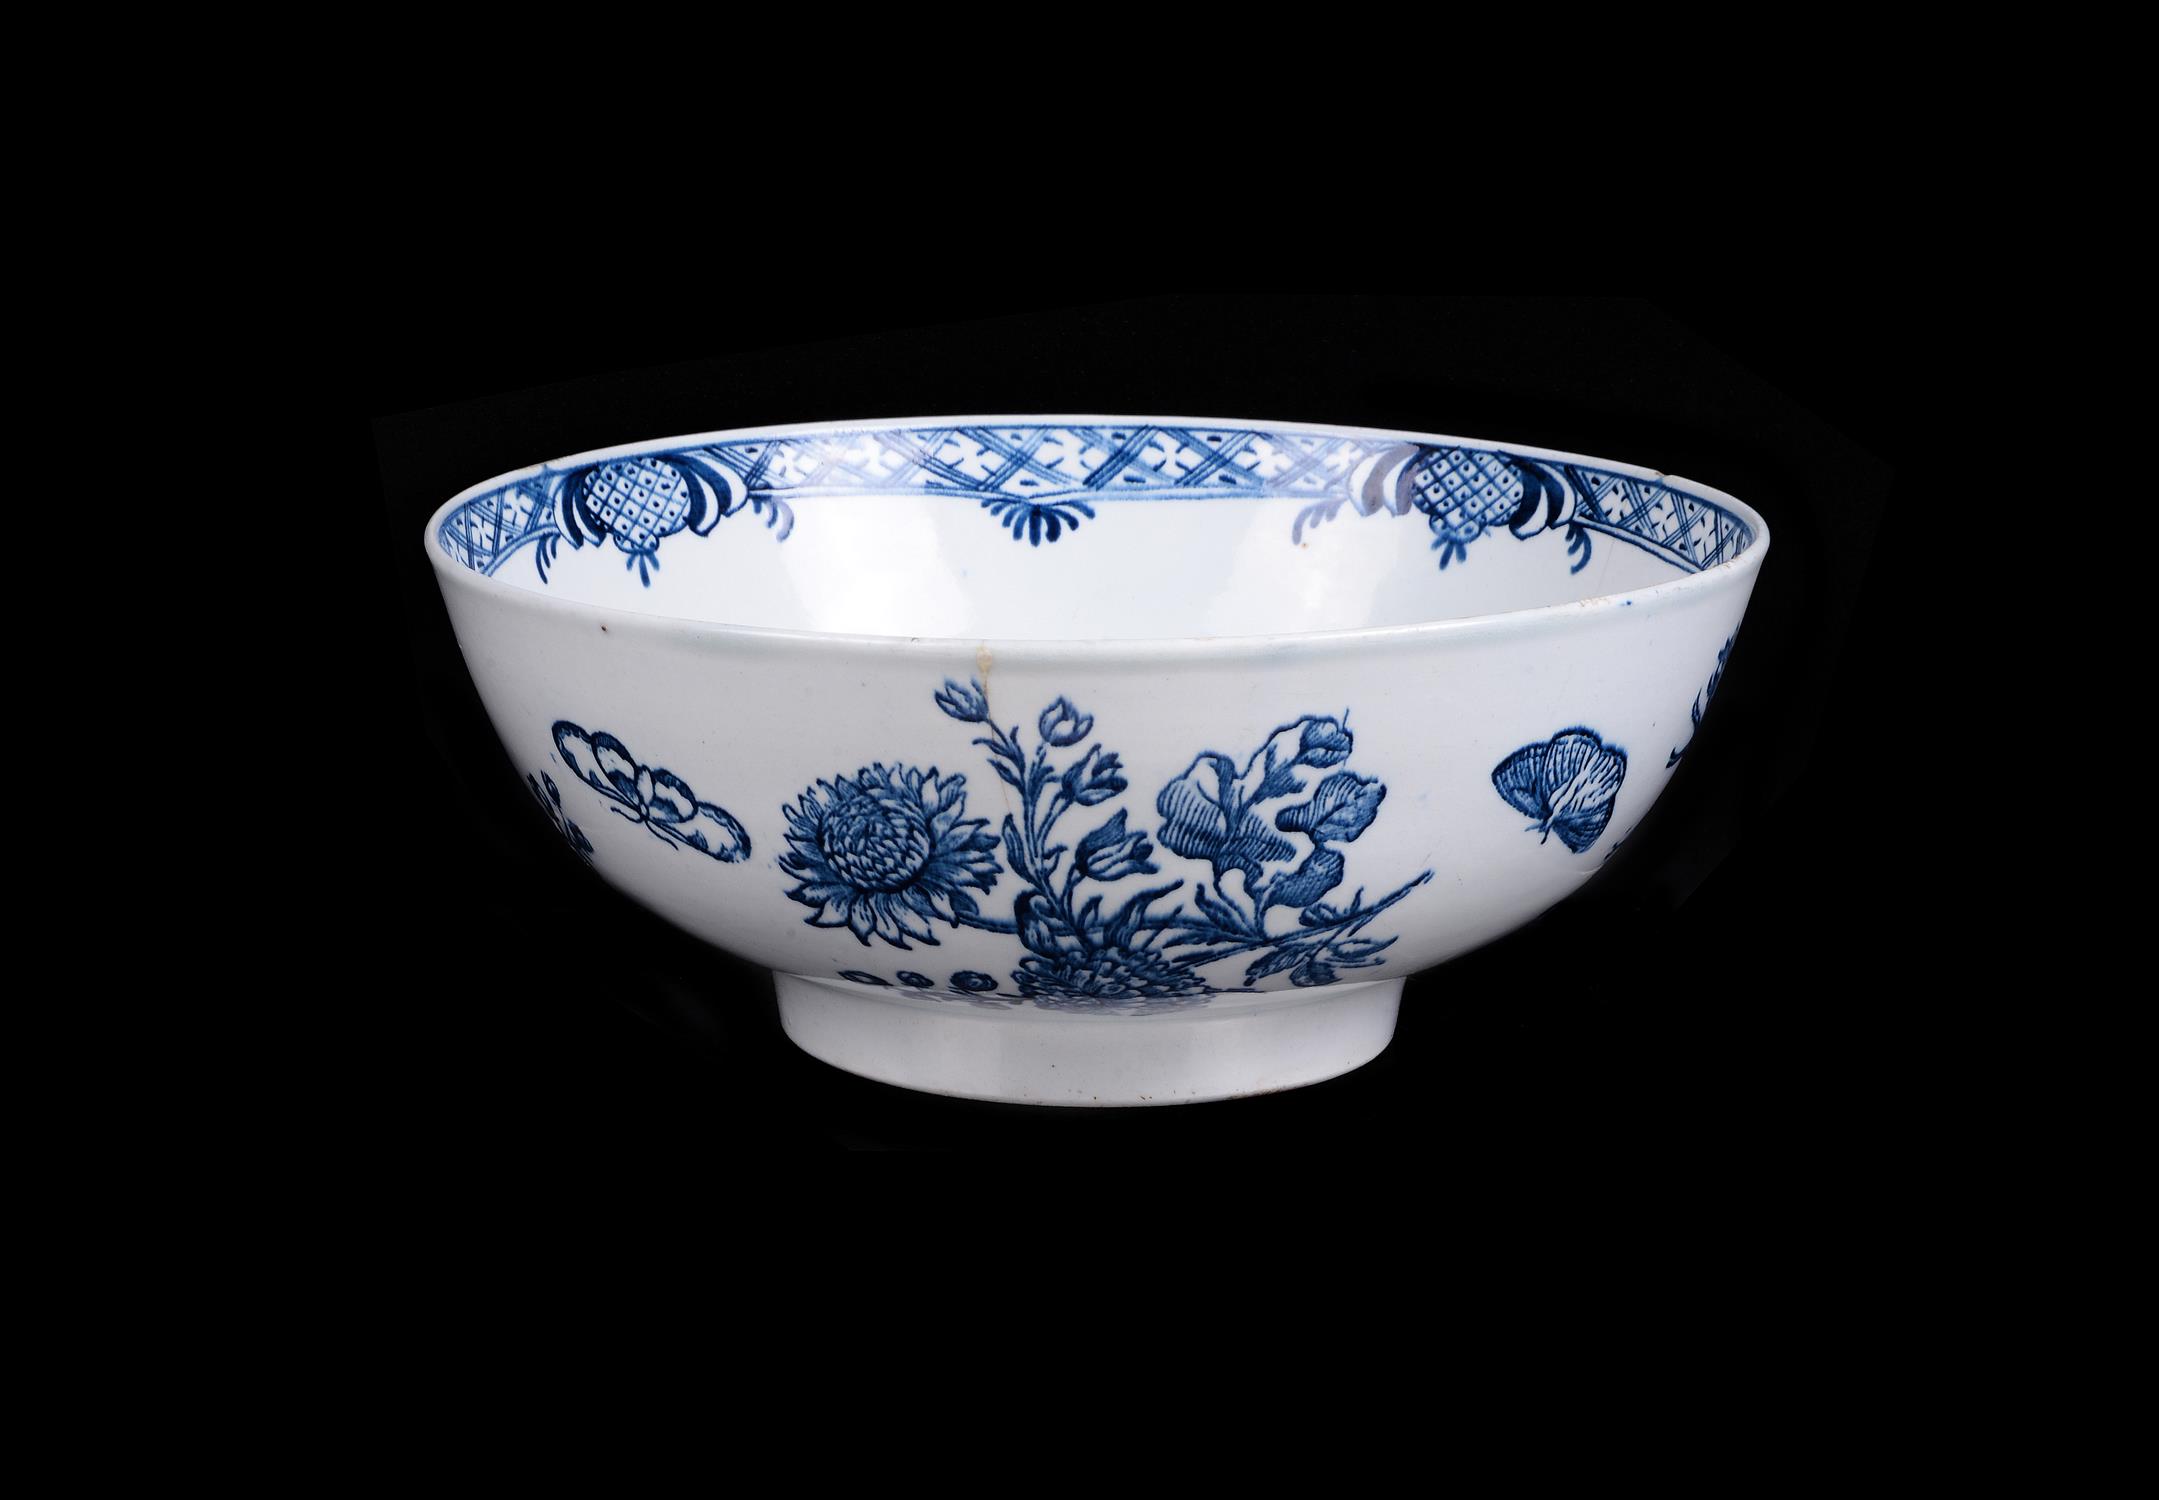 An English porcelain blue and white printed and painted punch bowl